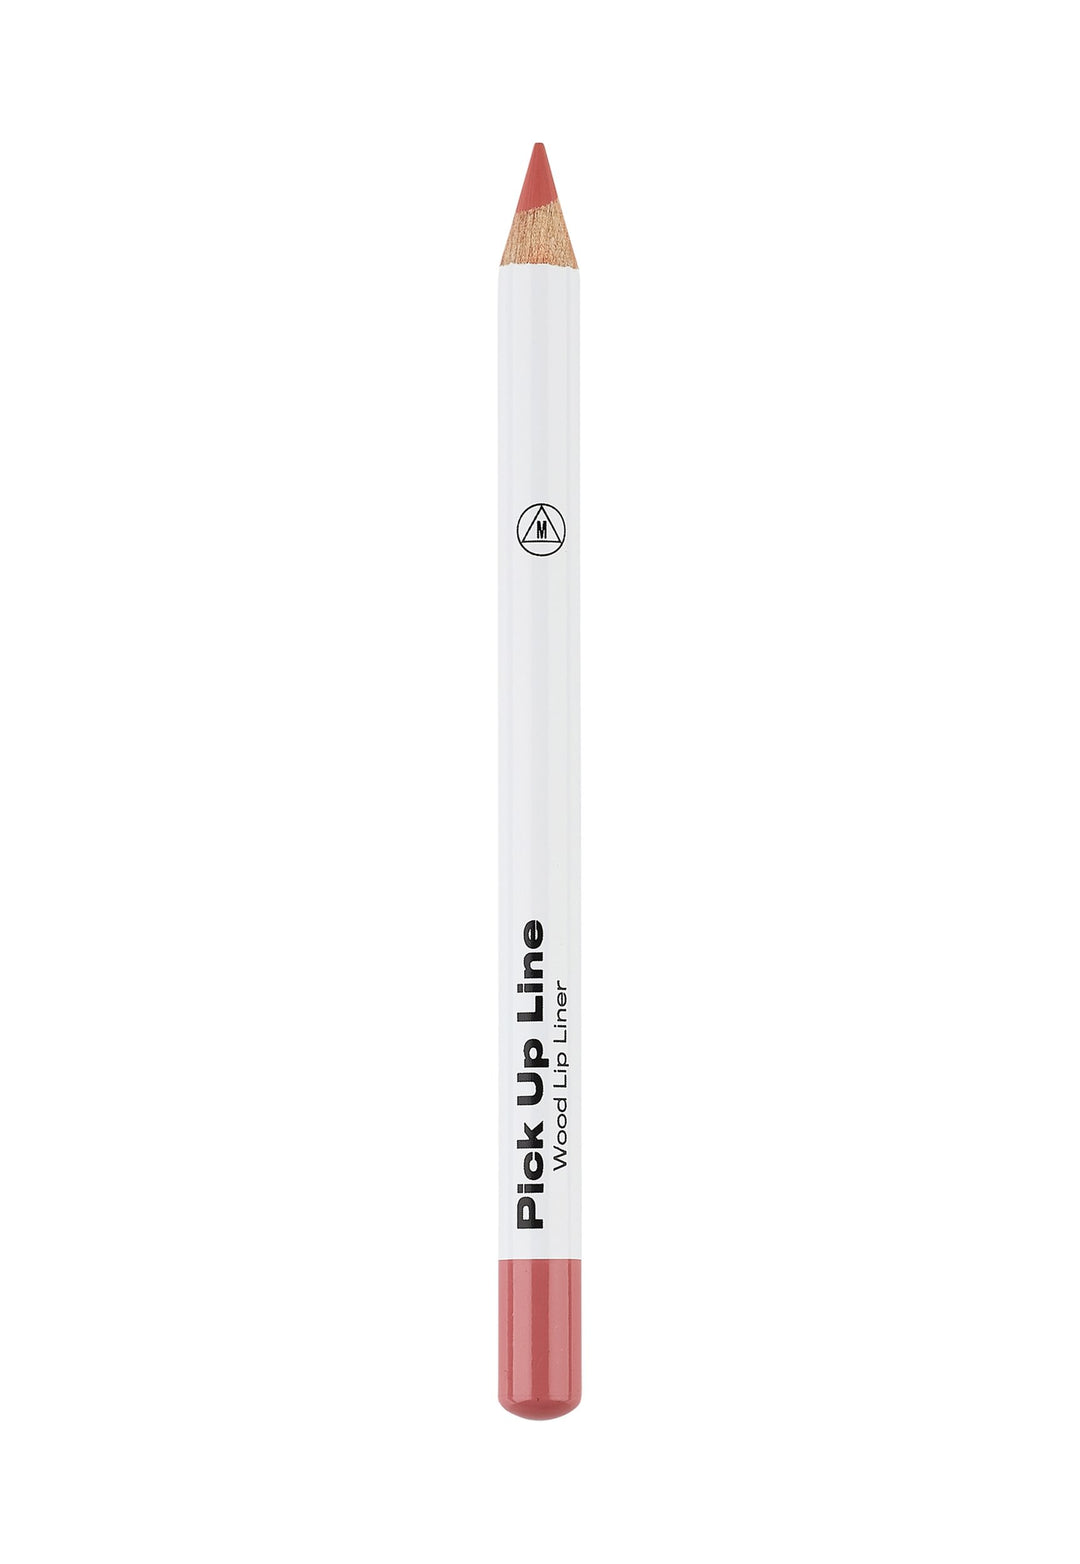 Missguided Beauty Pick Up Line Lip Liner